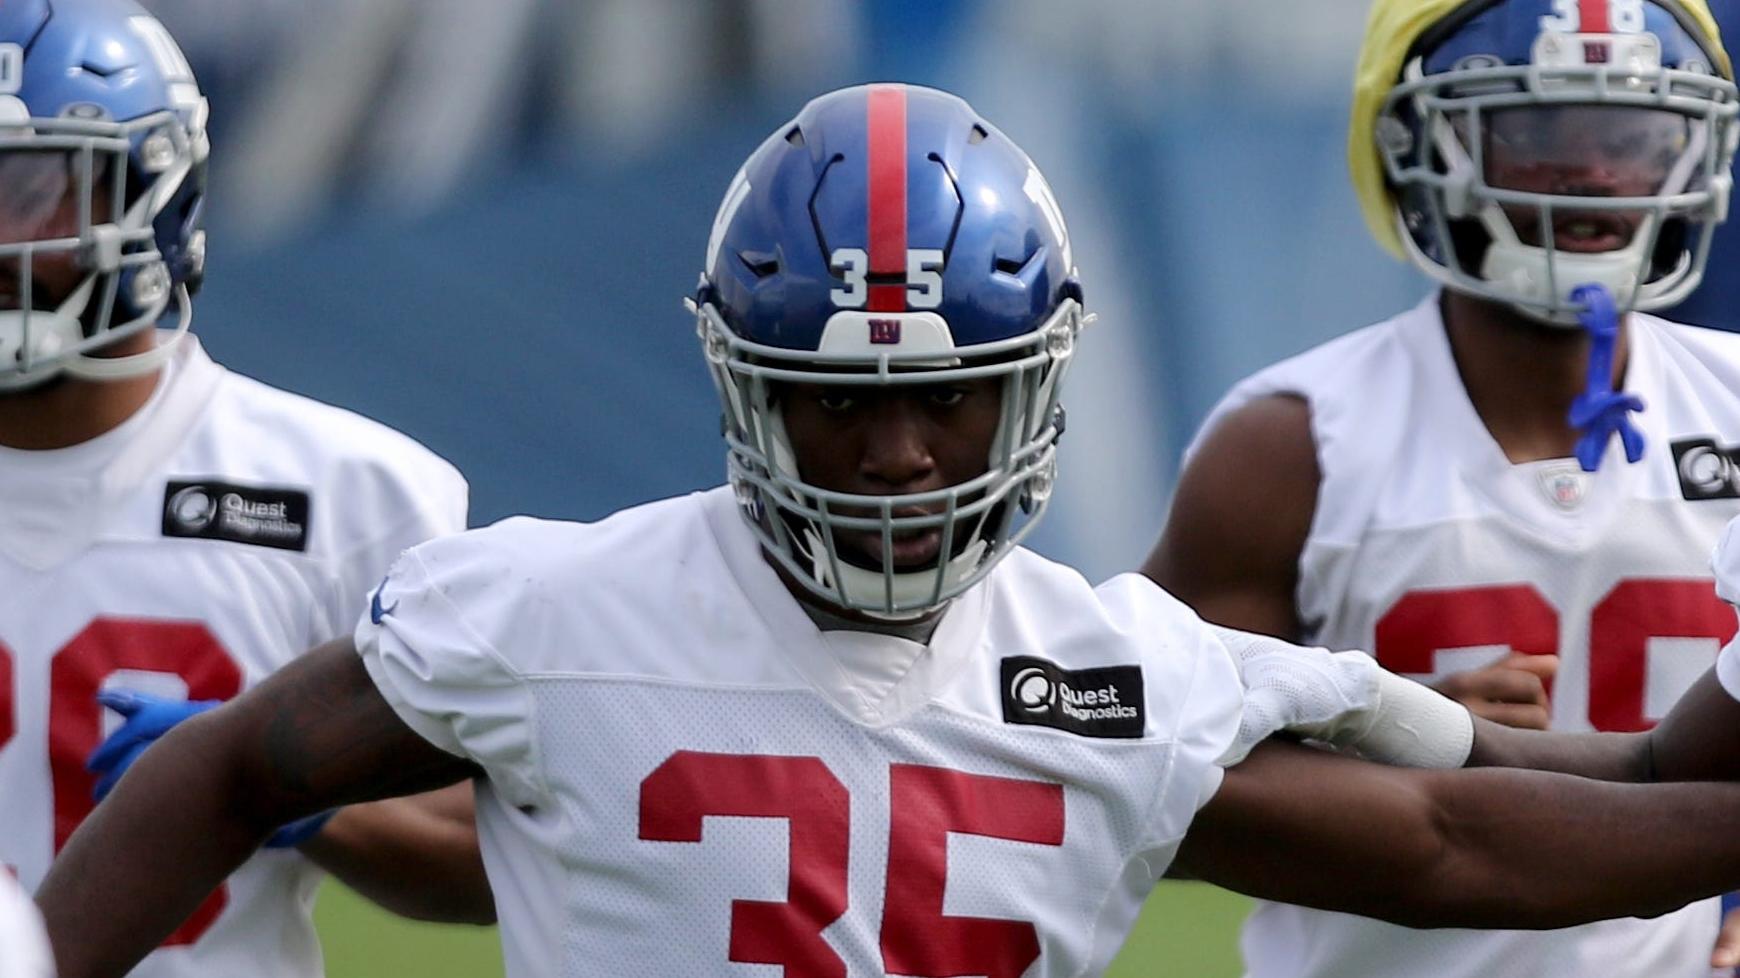 Linebacker, TJ Brunson (35) and cornerback, Isaac Yiadom, are shown at the Giants practice facility, in East Rutherford. / Danielle Parhizkaran/NorthJersey.com-Imagn Content Services, LLC